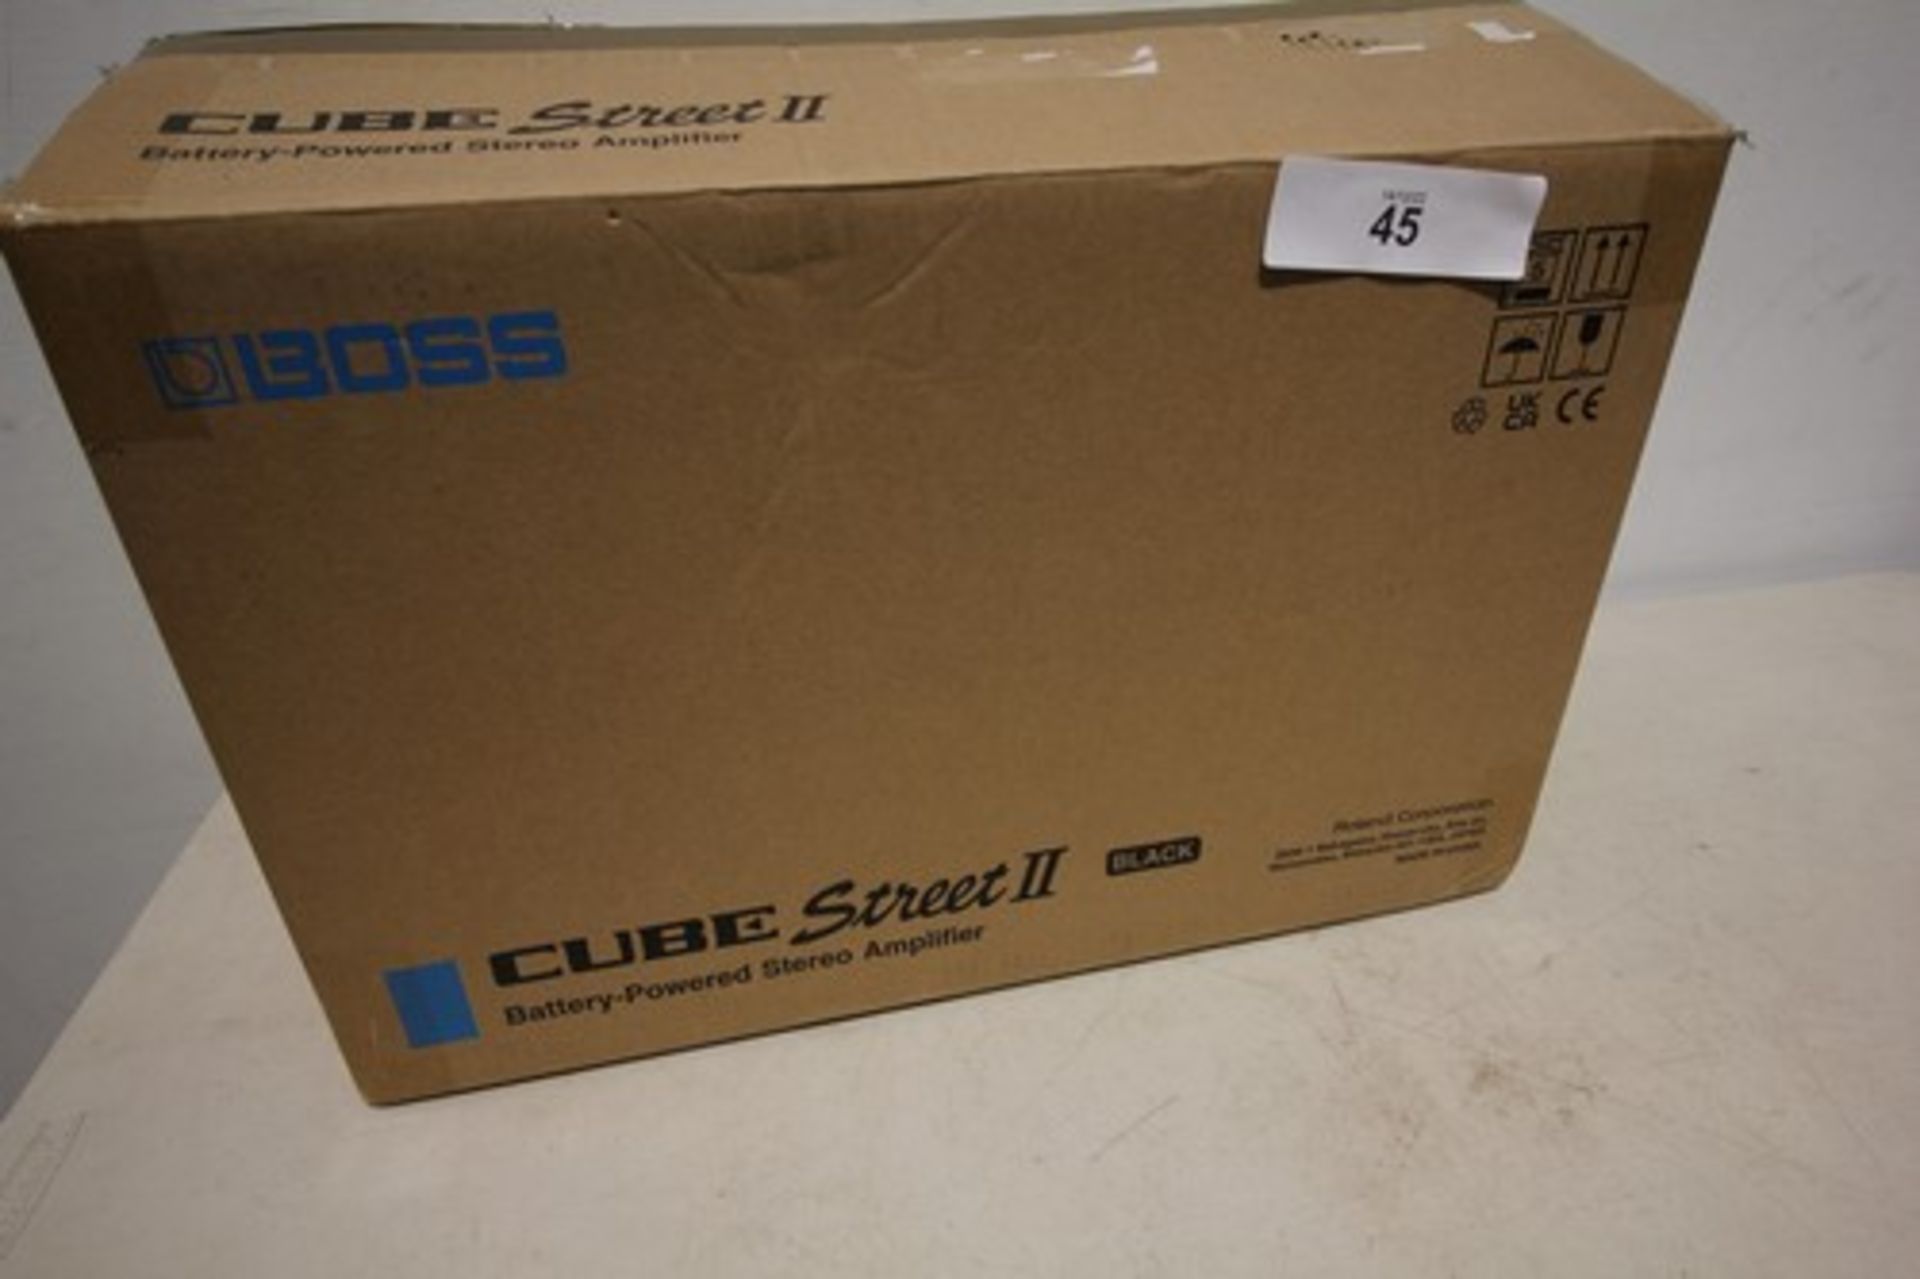 1 x Boss Cube Street 2 portable battery powered stereo amp, model ST2 - new in box (ES3) - Image 3 of 3